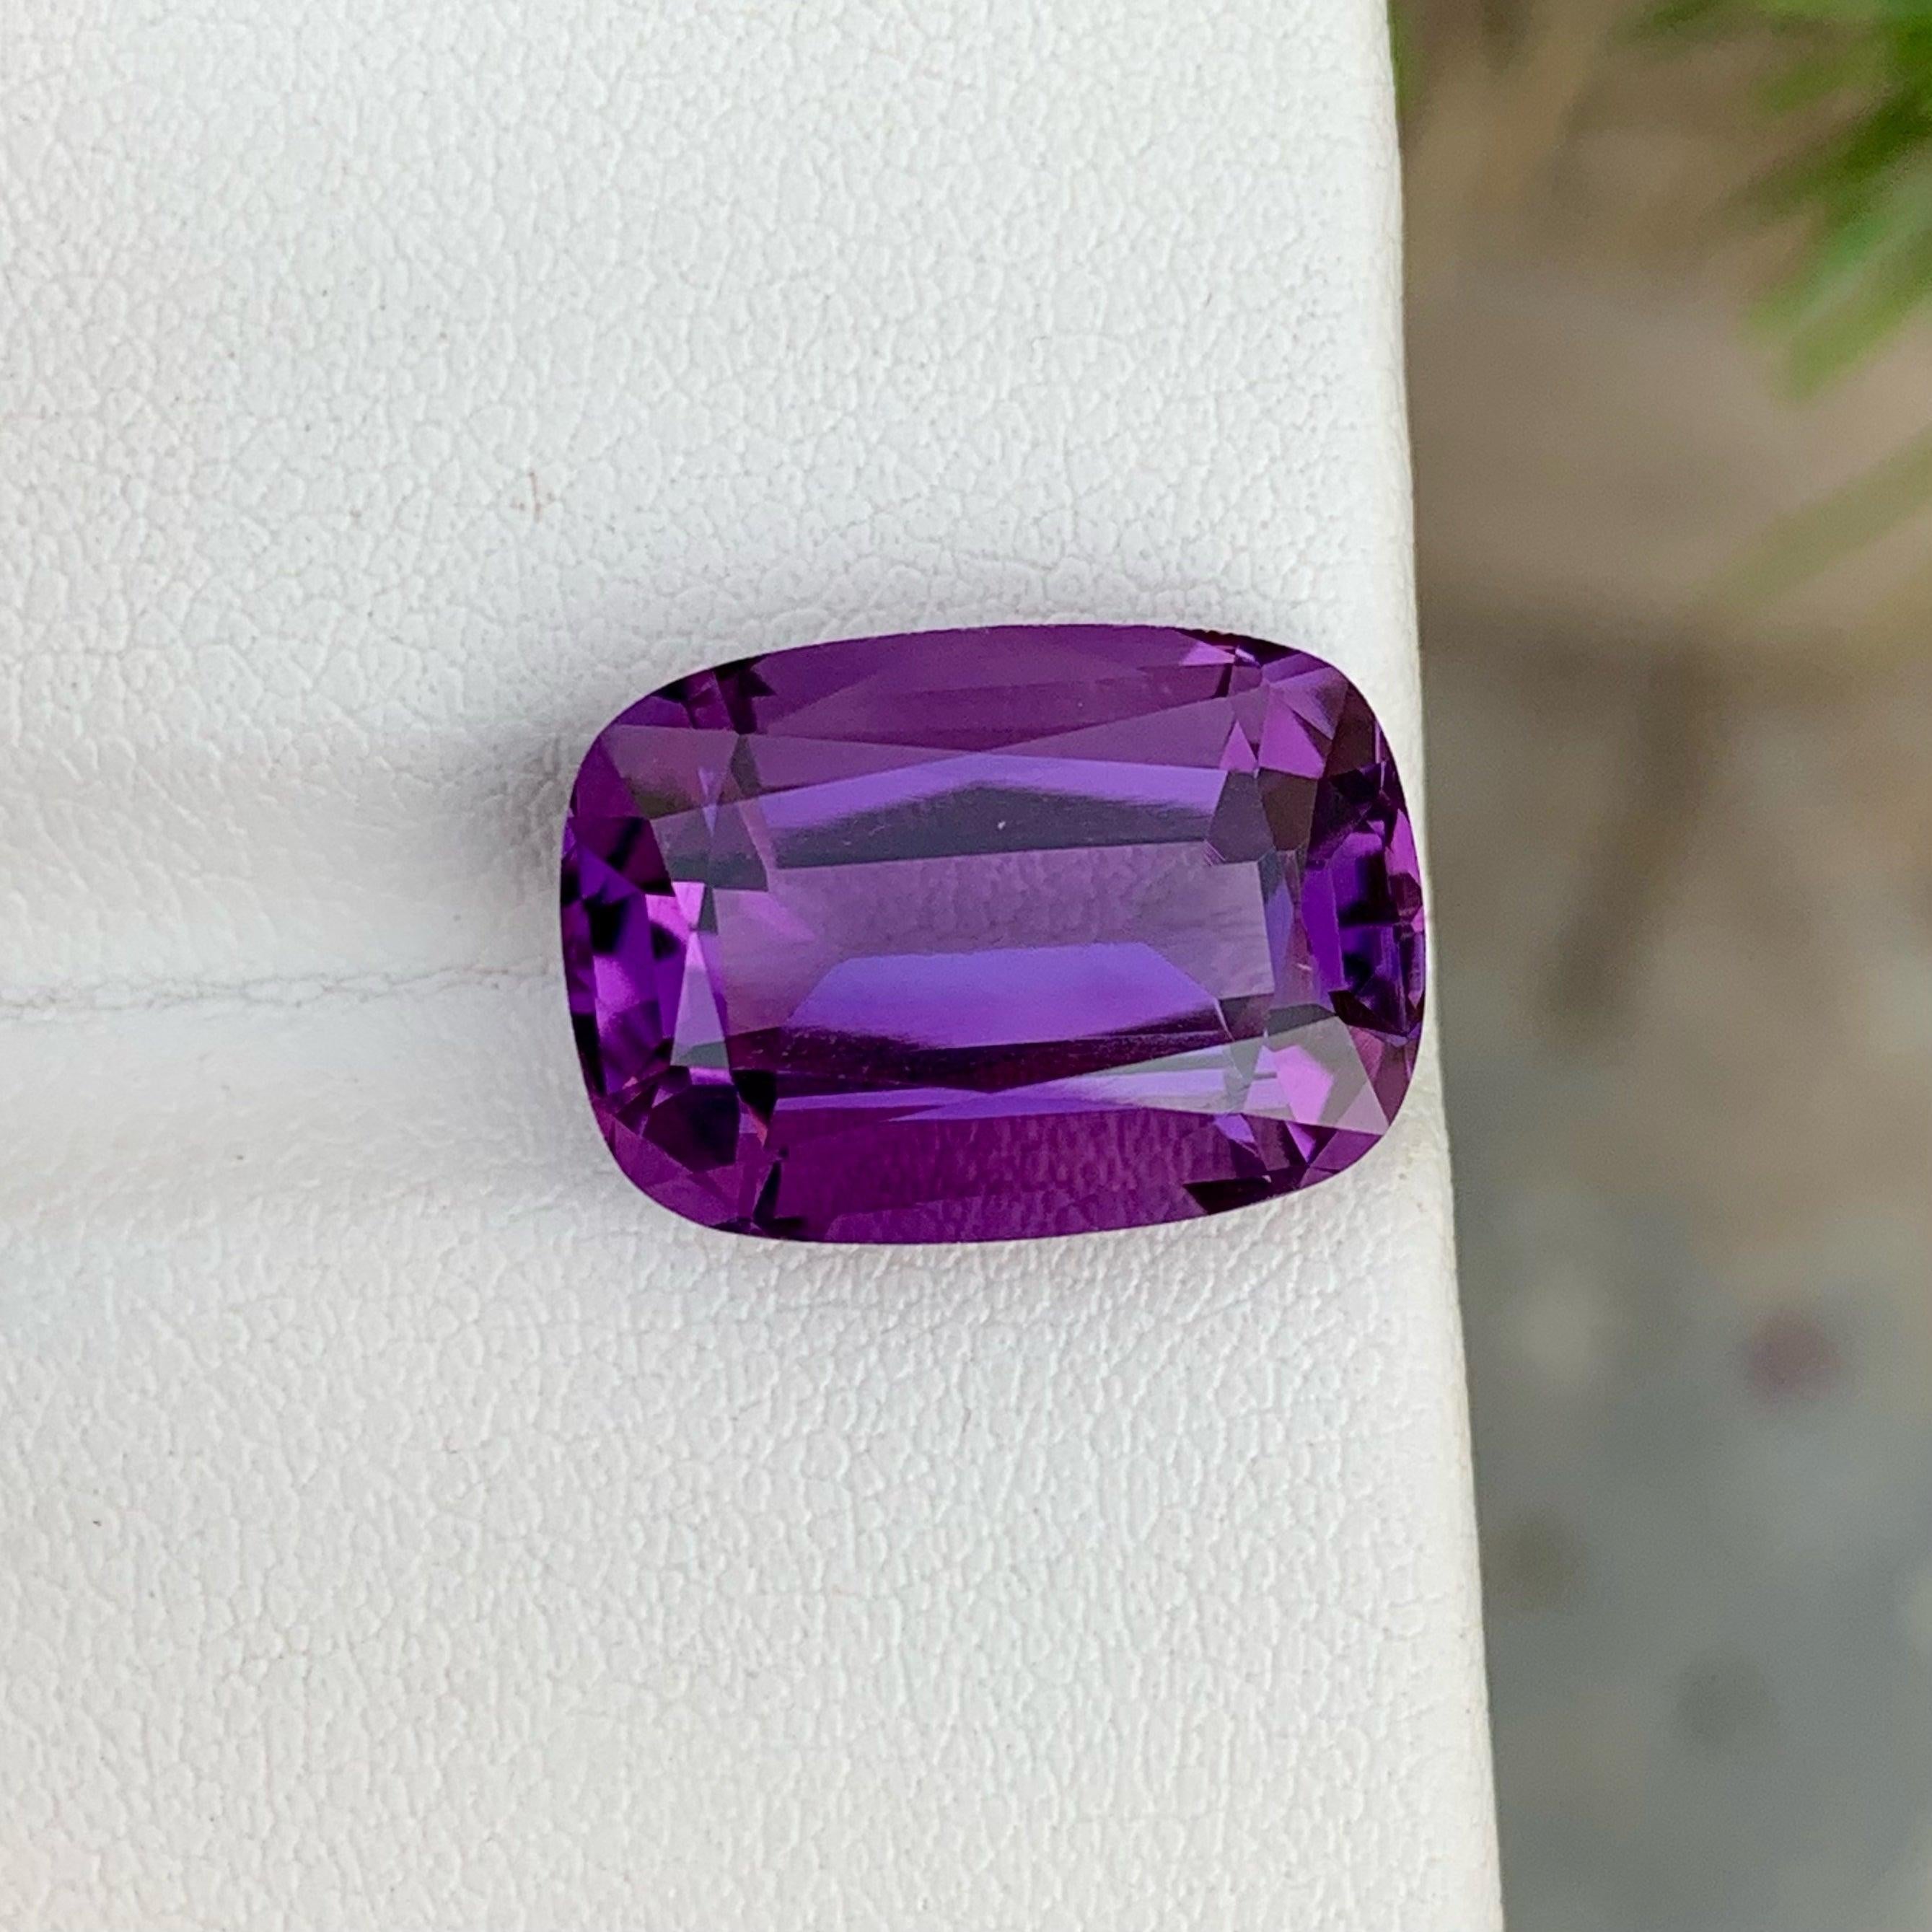 Fantastic Natural Deep Purple Amethyst Stone, Available for sale at wholesale price natural high quality at 9.80 Carats Eye Clean Clarity Unheated Natural Amethyst From Brazil.
 
Product Information:
GEMSTONE TYPE:	Fantastic Natural Deep Purple